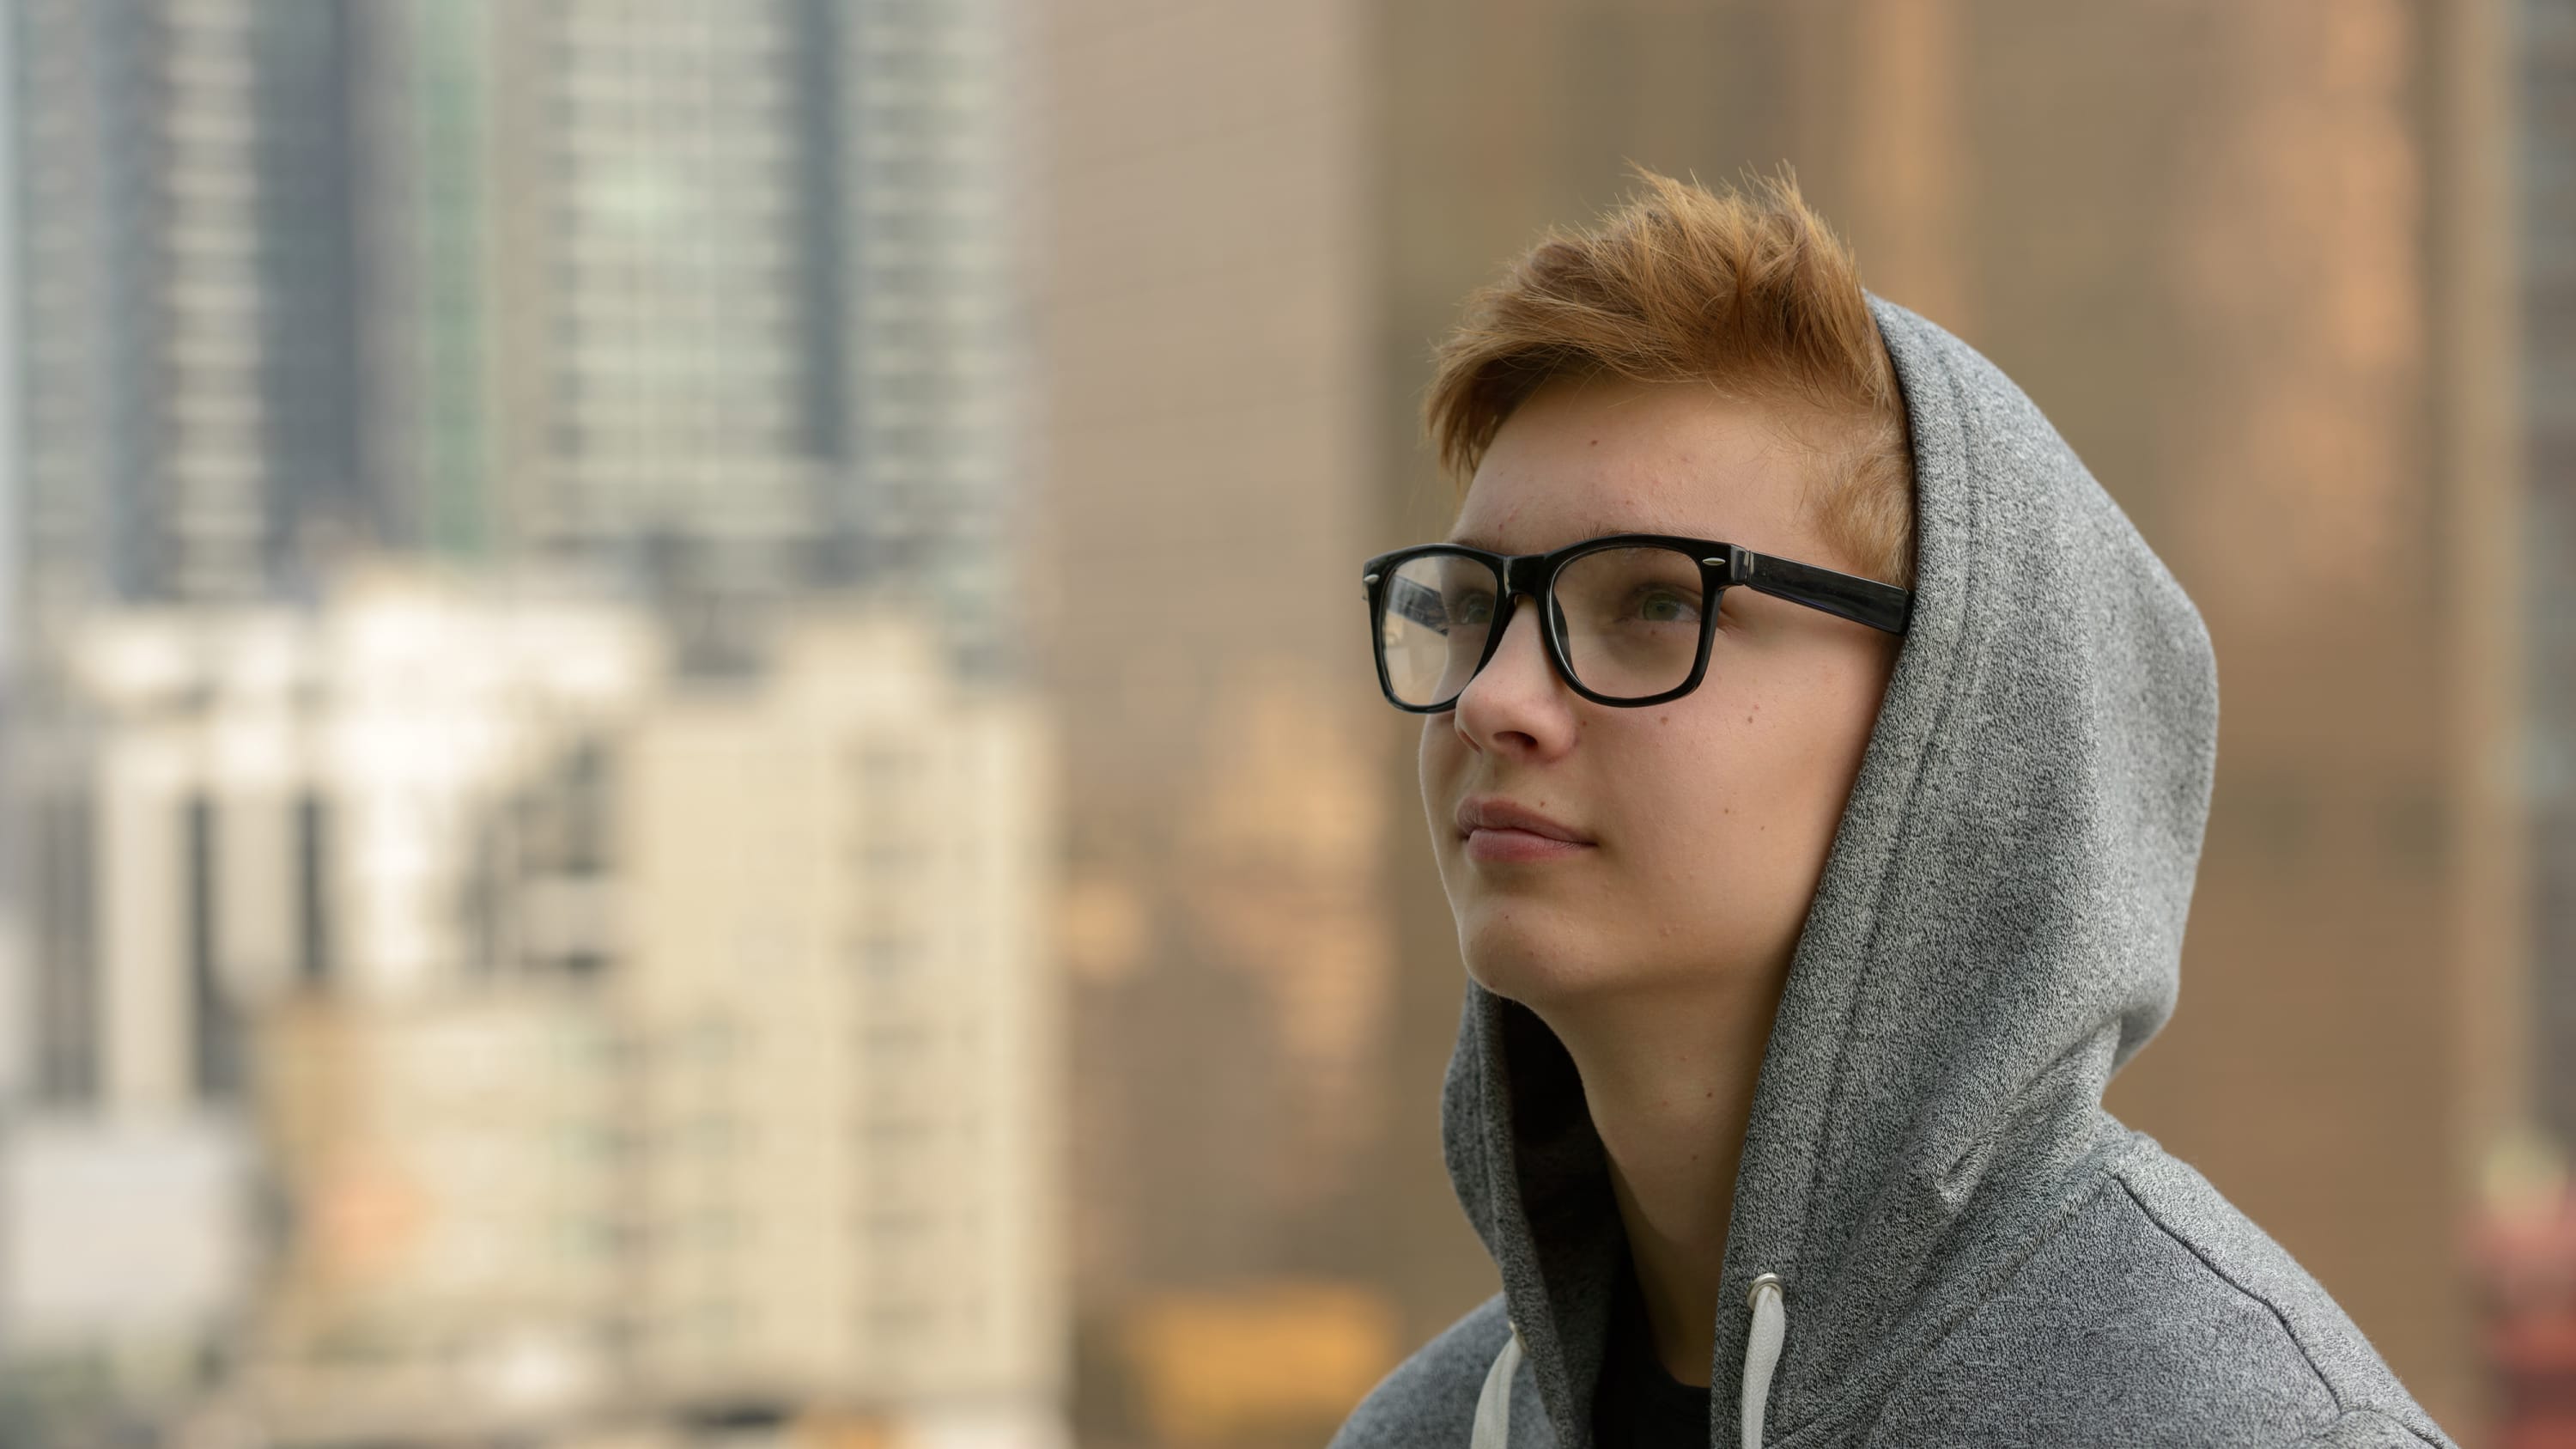 A teenager in a hoodie sweatshirt who could have sarcoma.